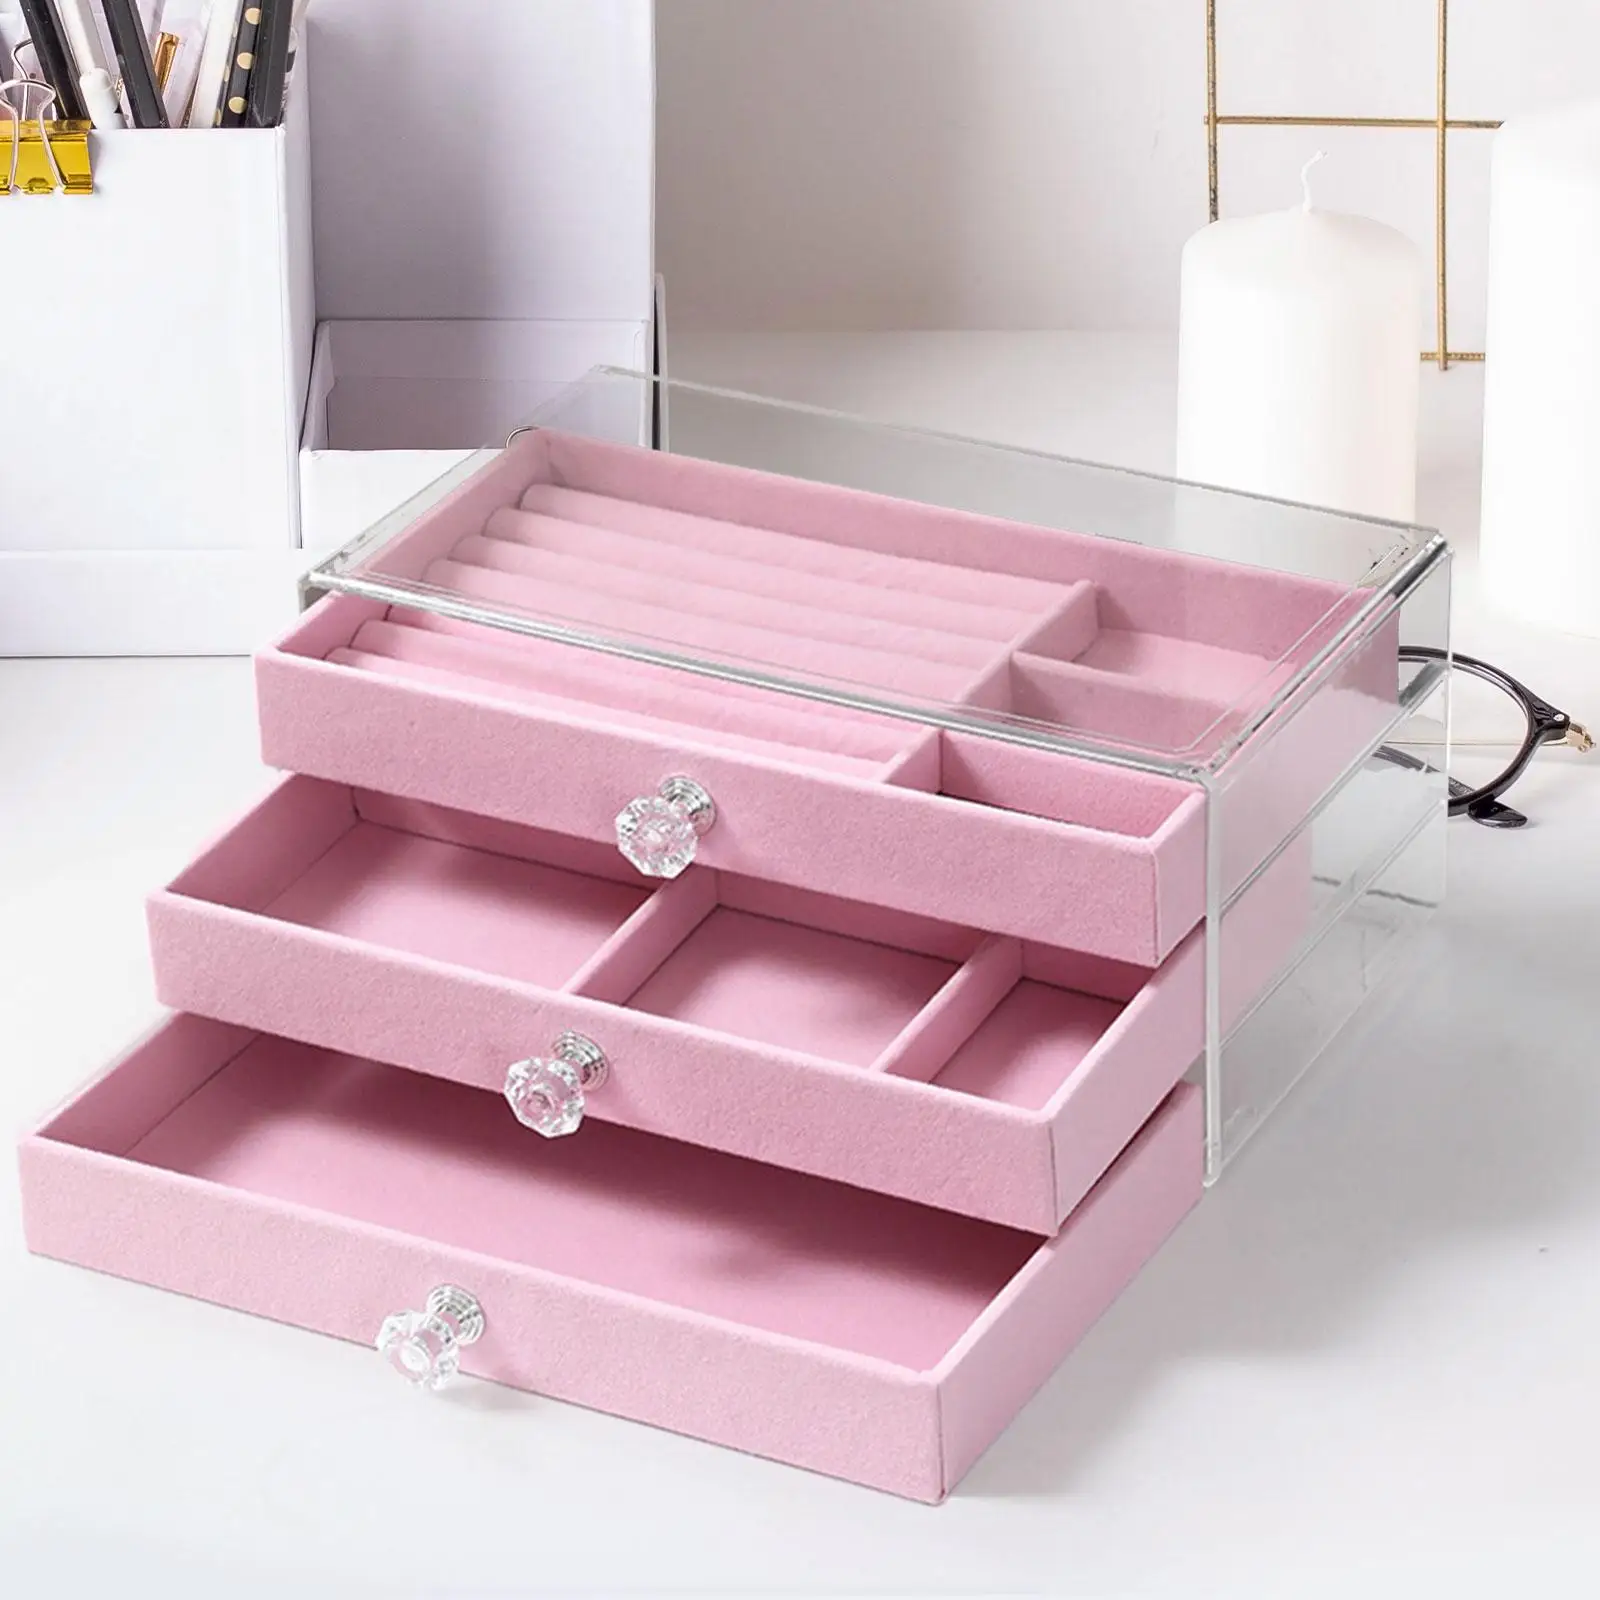 Portable Jewelry Box Large Capacity Rings Mirrored 3 Layer for Women Girls Jewelry Storage Box for Friends, Wife or Mother Gift